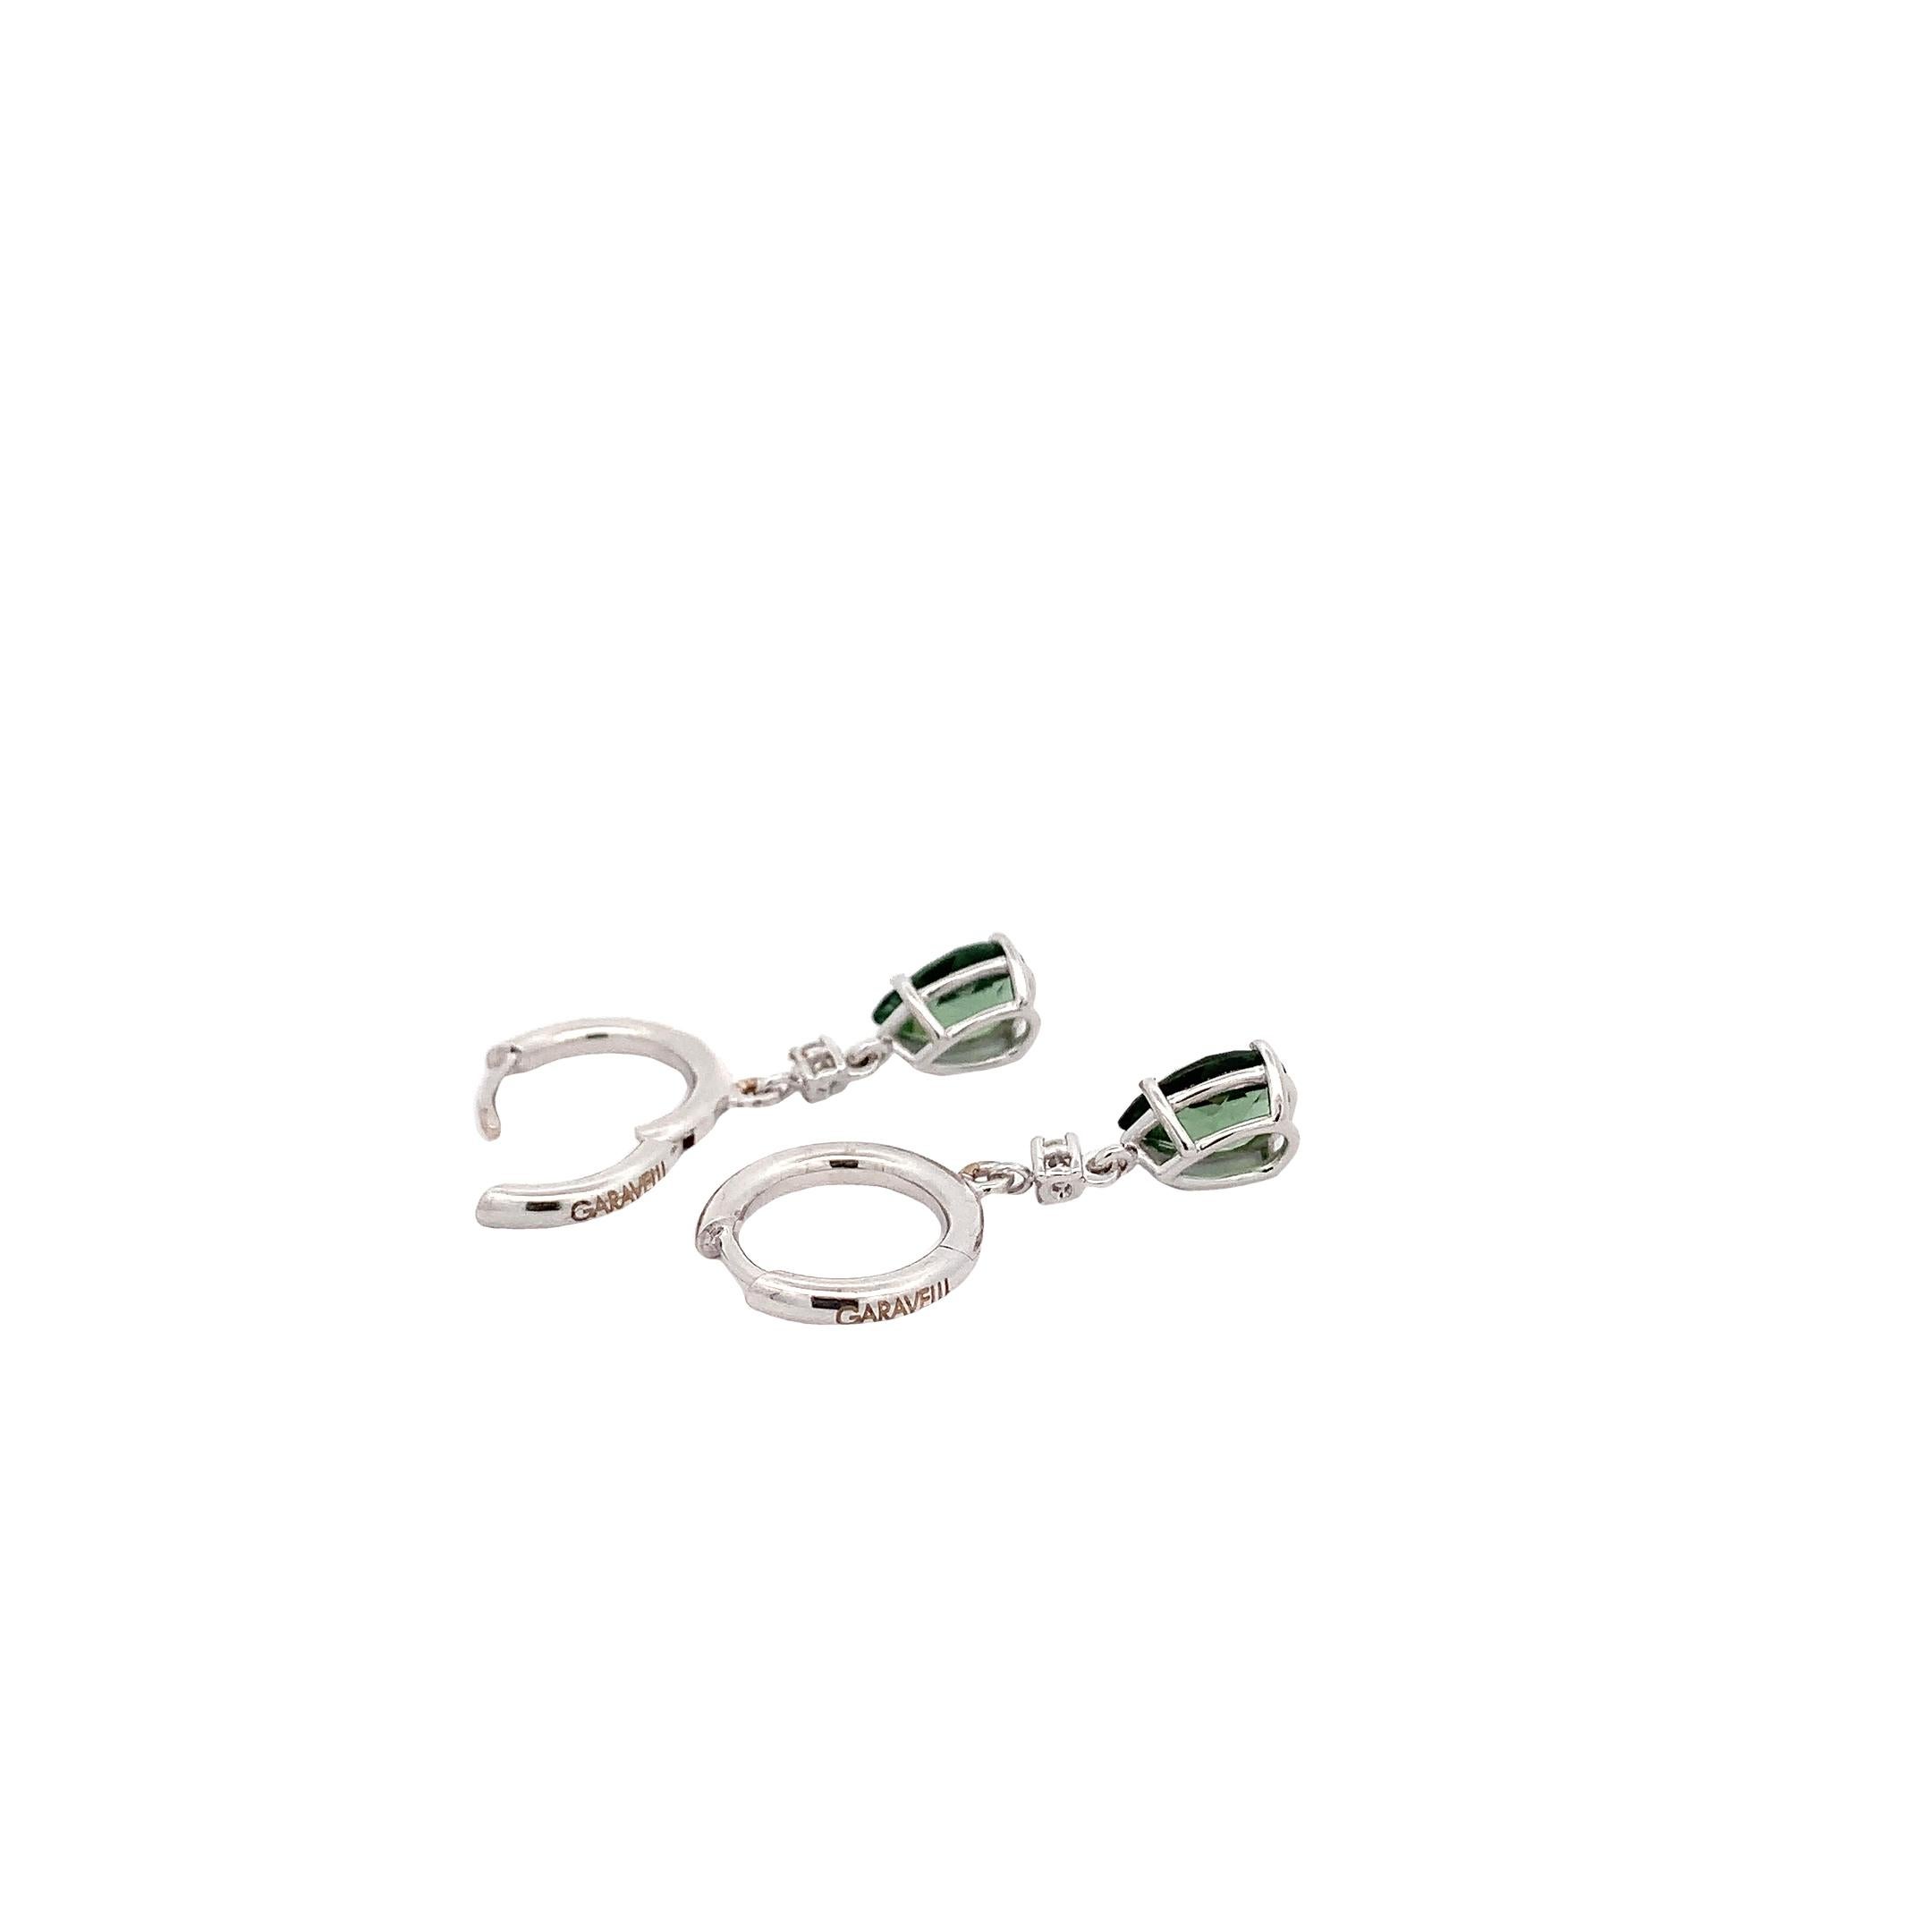 Round Cut 18 Kt WhiteGold Green Tourmaline and Diamonds Garavelli Hanging Earrings For Sale